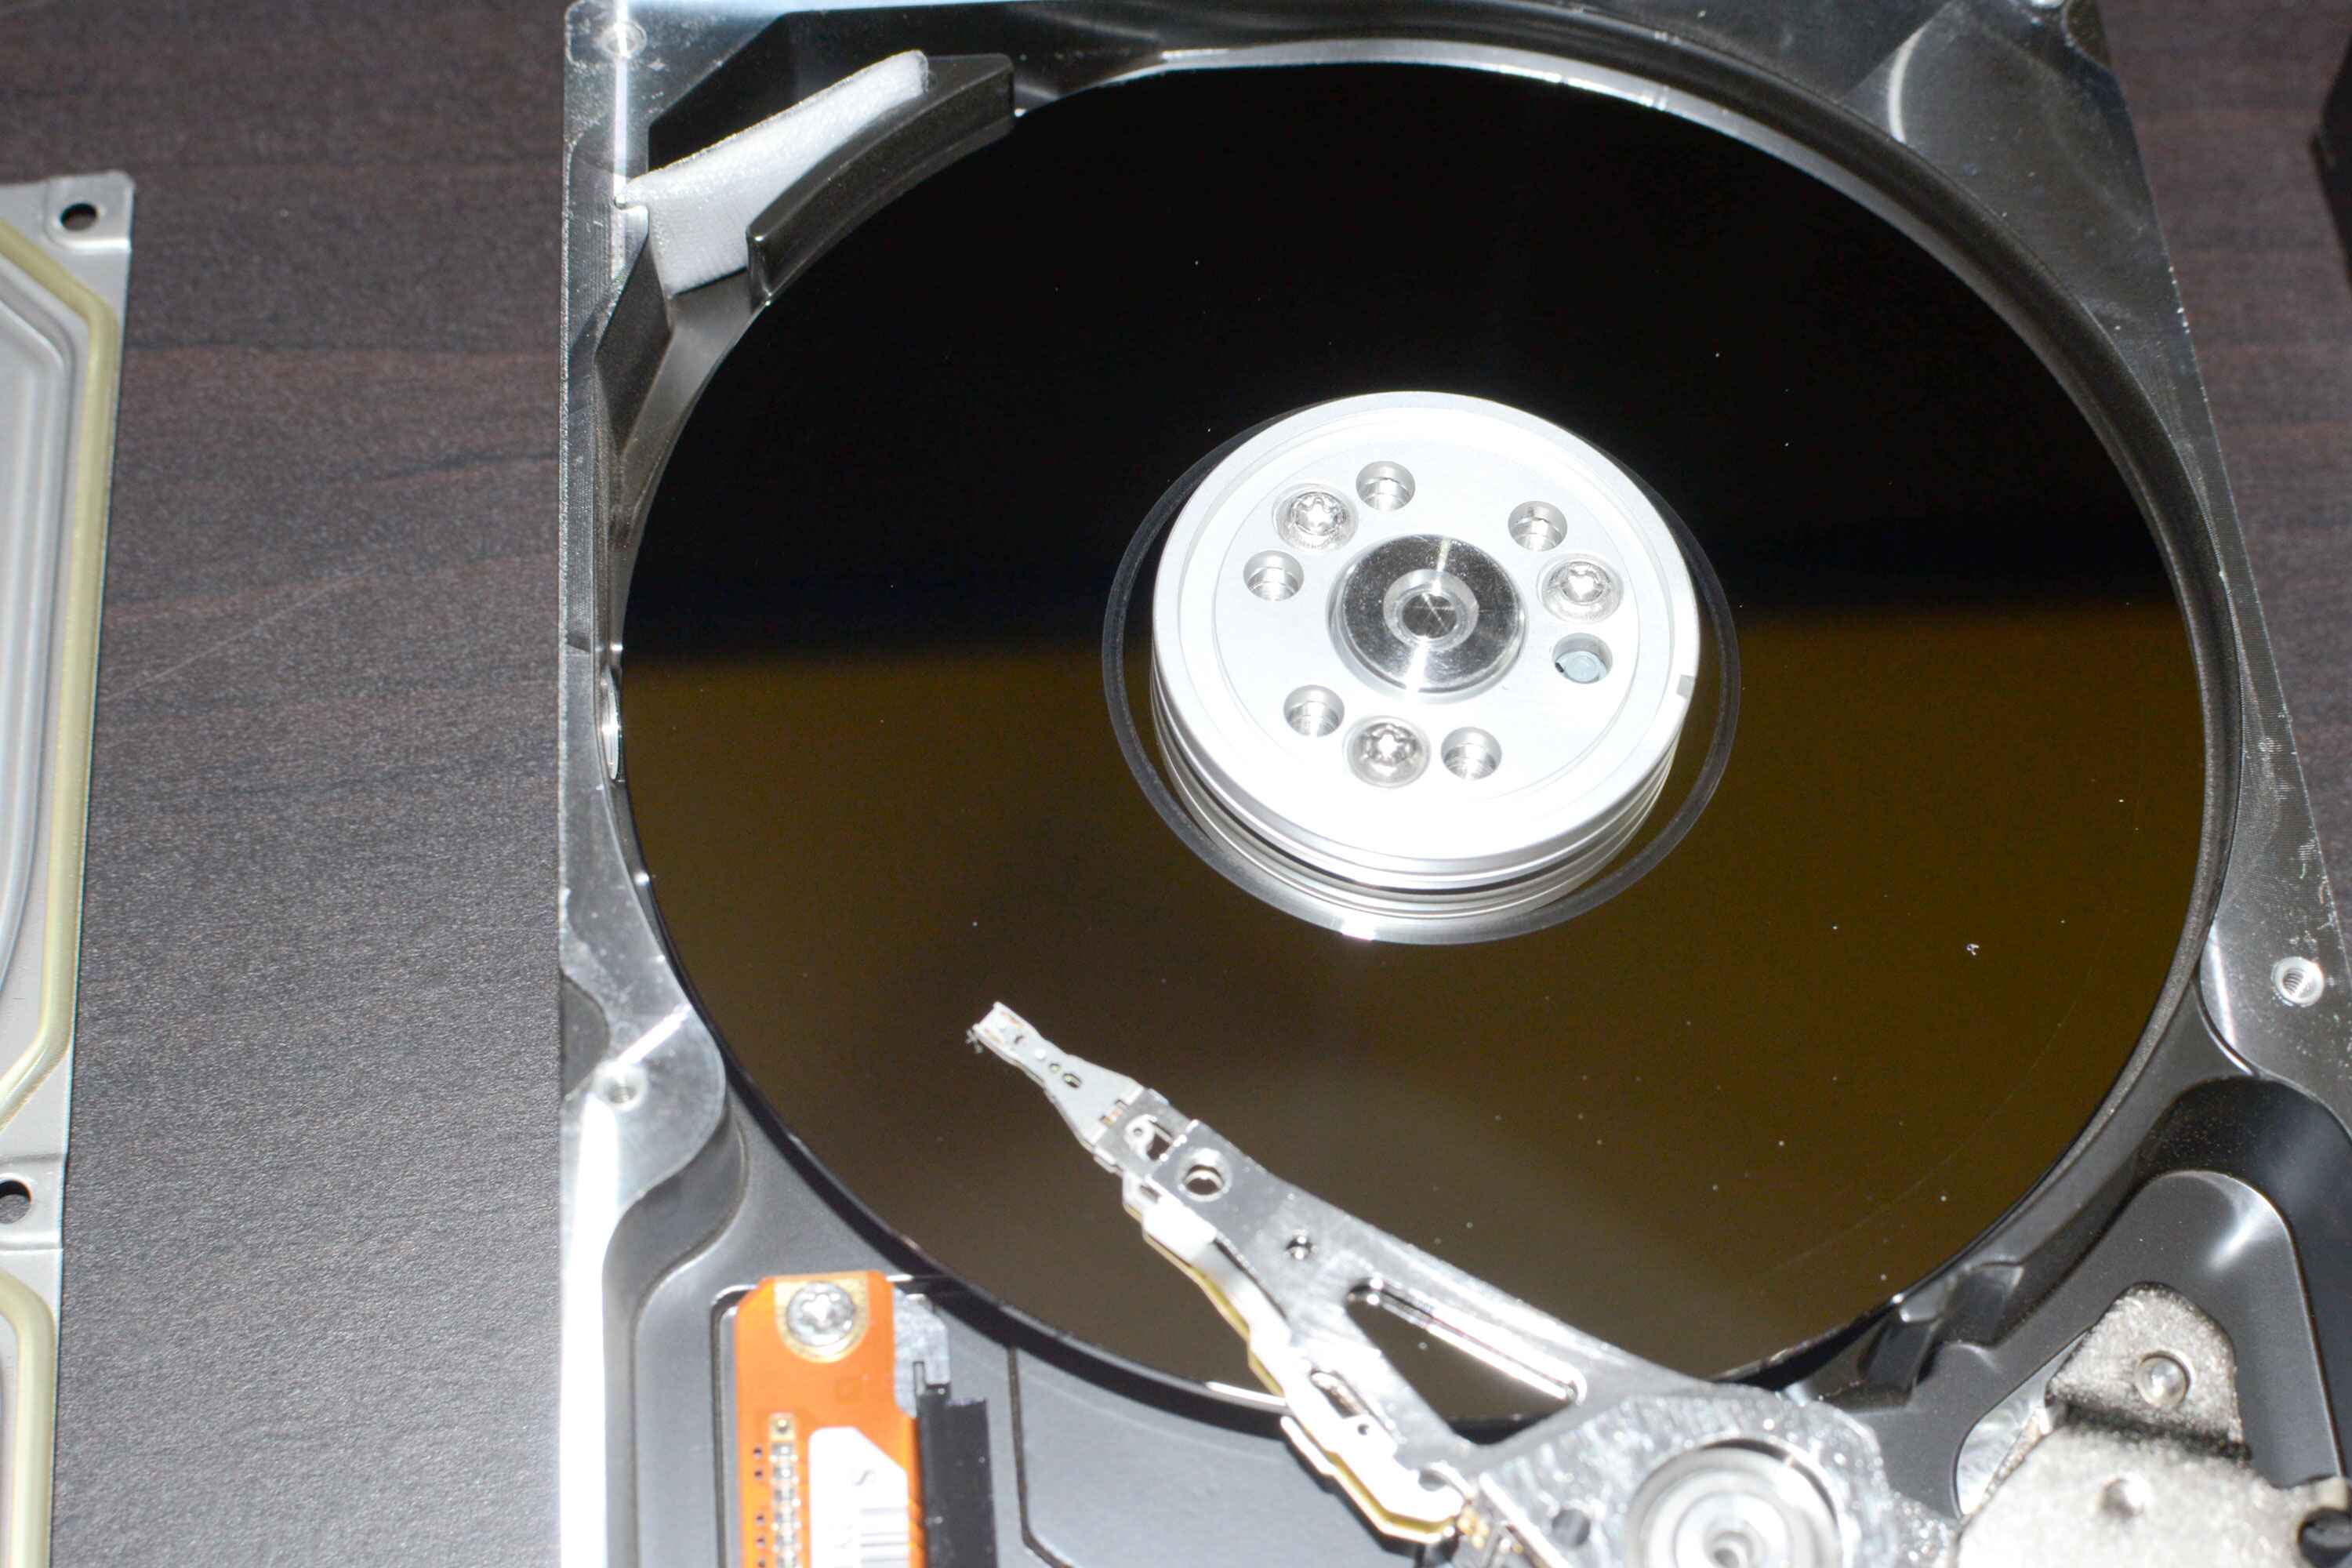 How To Initialize A Hard Disk Drive